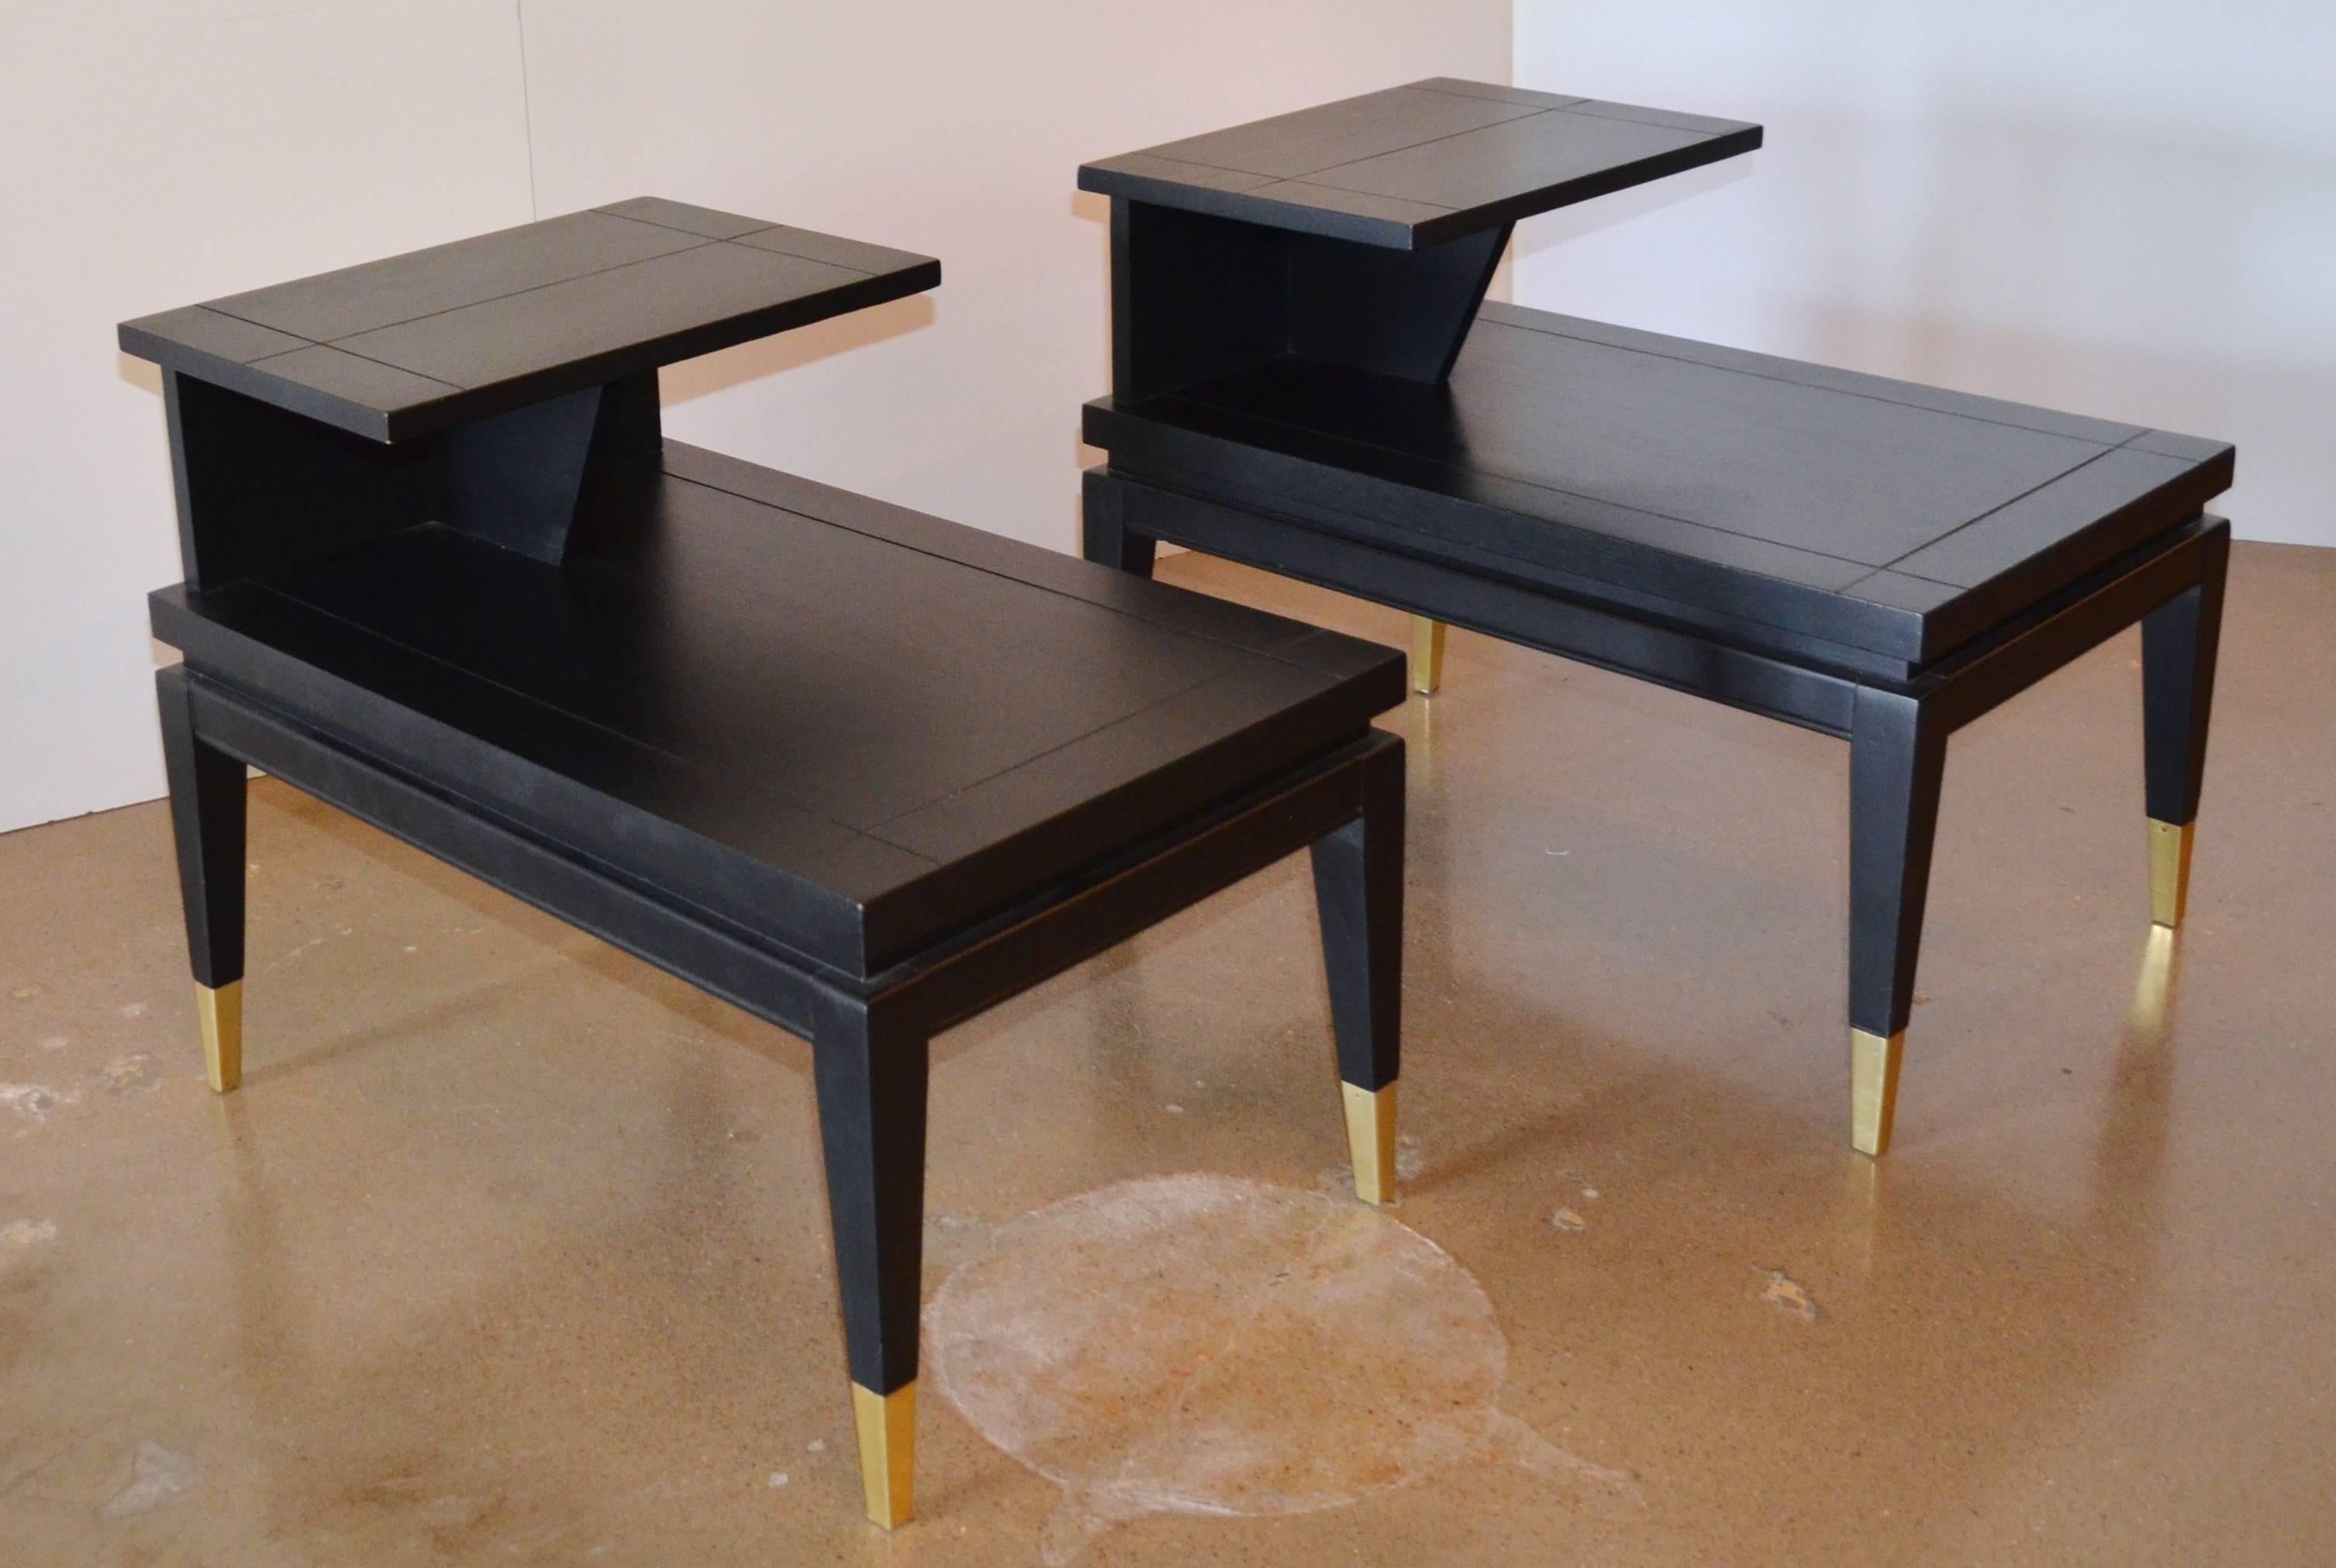 A Mid-Century Modern pair of two-tiered end or side tables in a black ebony finish with brass capped feet. Could also be used as nightstands. Manufactured by the Lane Furniture Company. Marked on bottom - Lane Style no 1687 Serial no 752030.